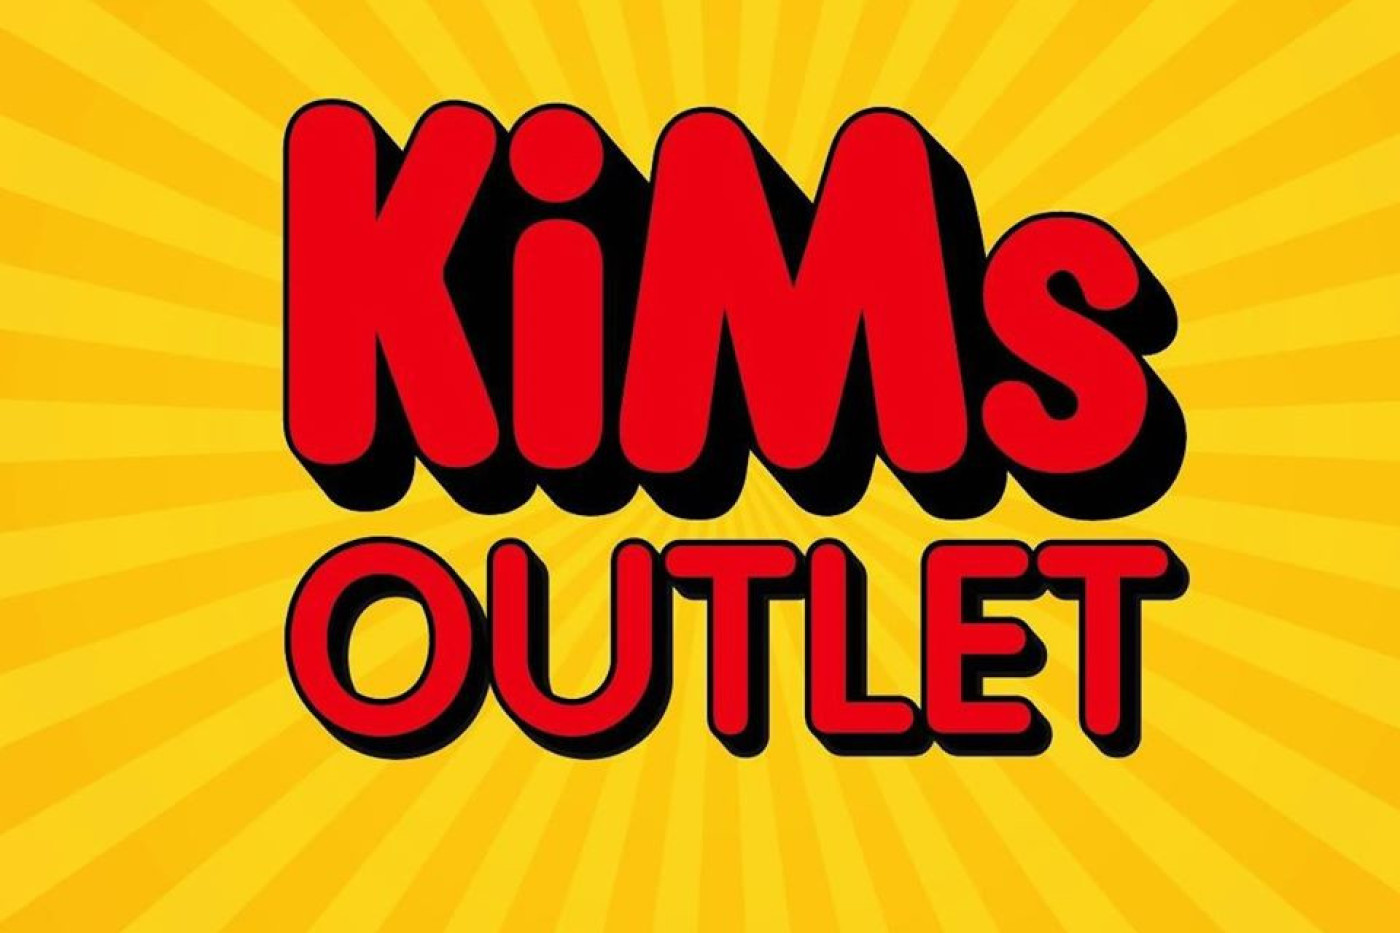 KIMs Outlet